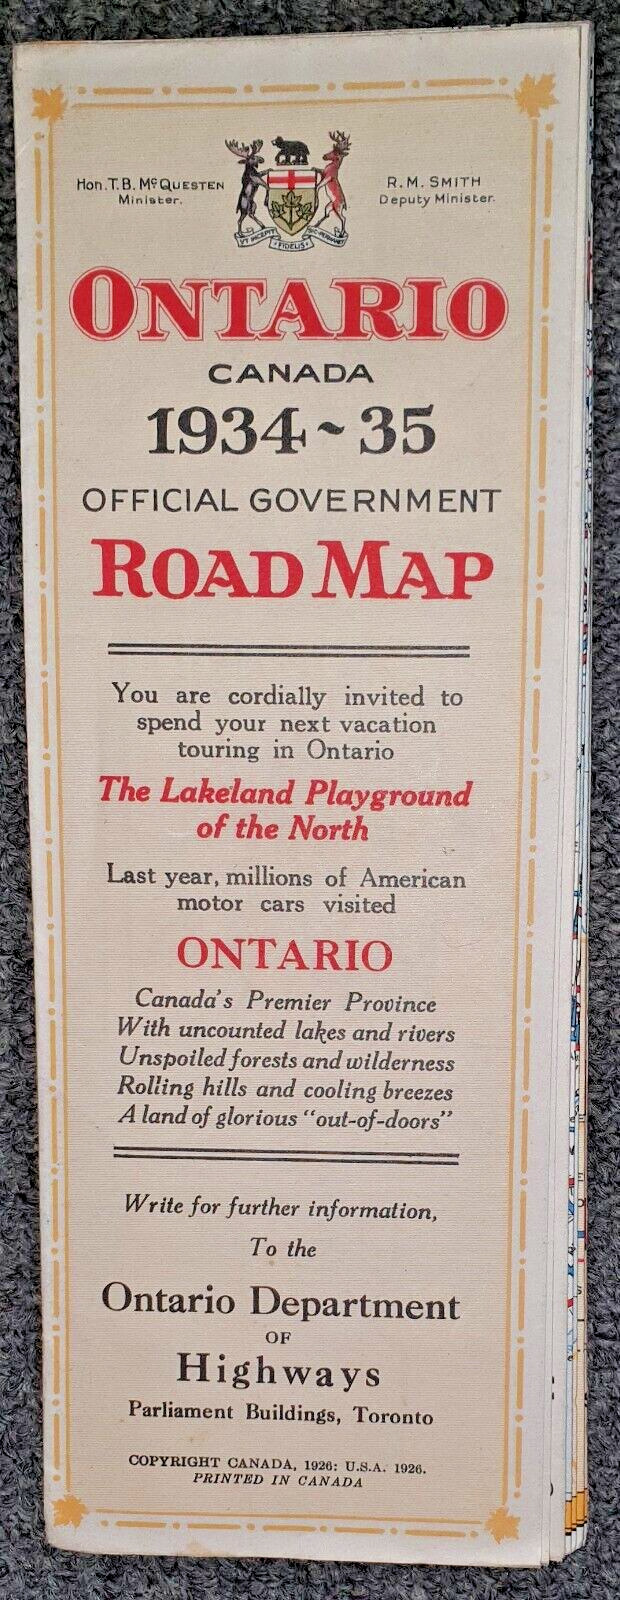 1934 - 1935 ONTARIO CANADA OFFICIAL GOVERNMENT ROAD MAP EX COND